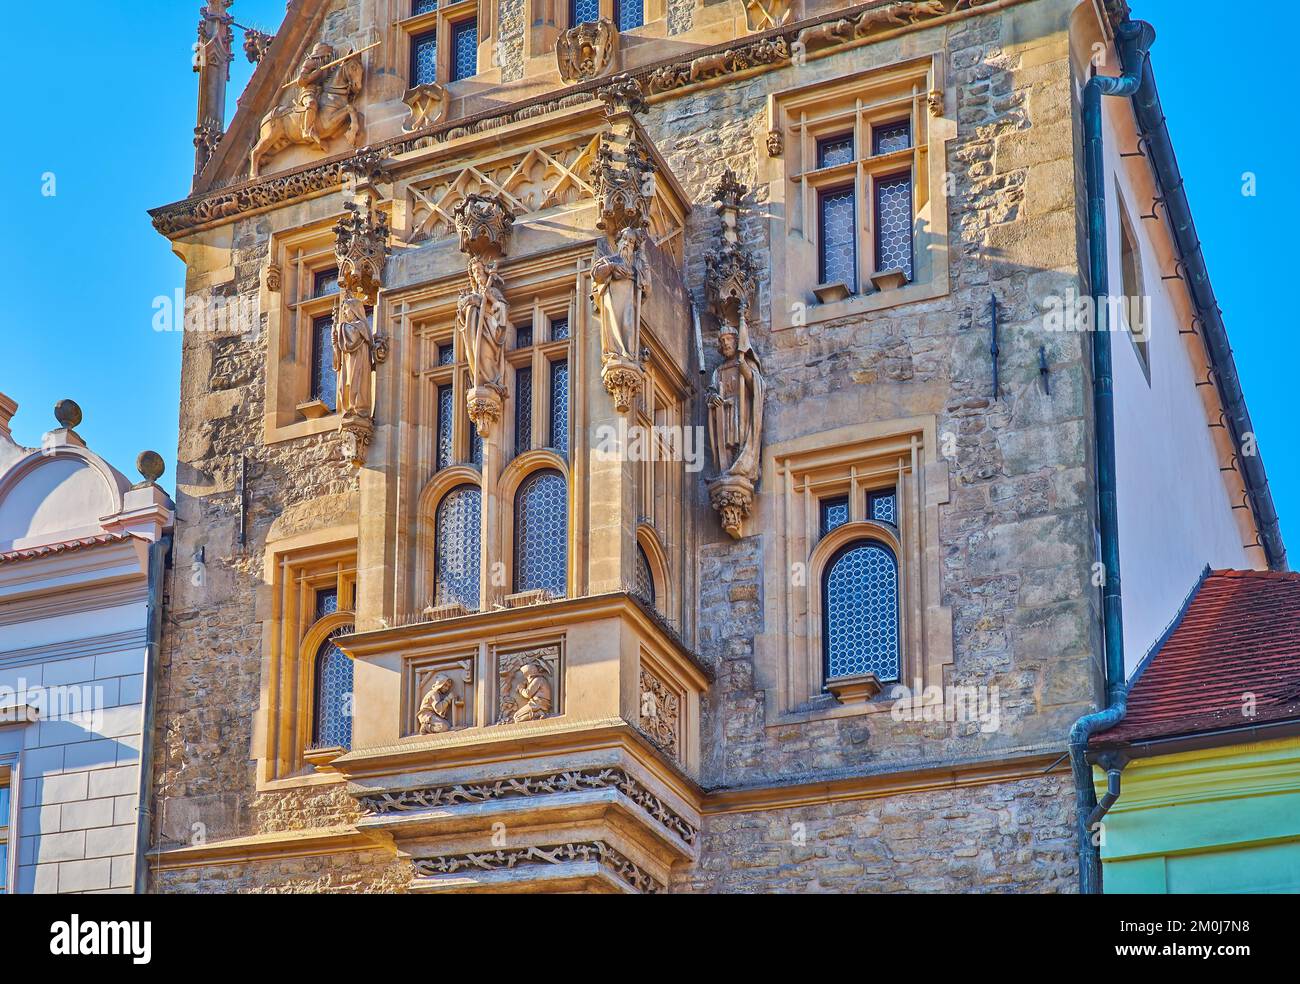 Ornate facade details of the Stone House with carvings, sculptures and oriel window, Kutna Hora, Czech Republic Stock Photo